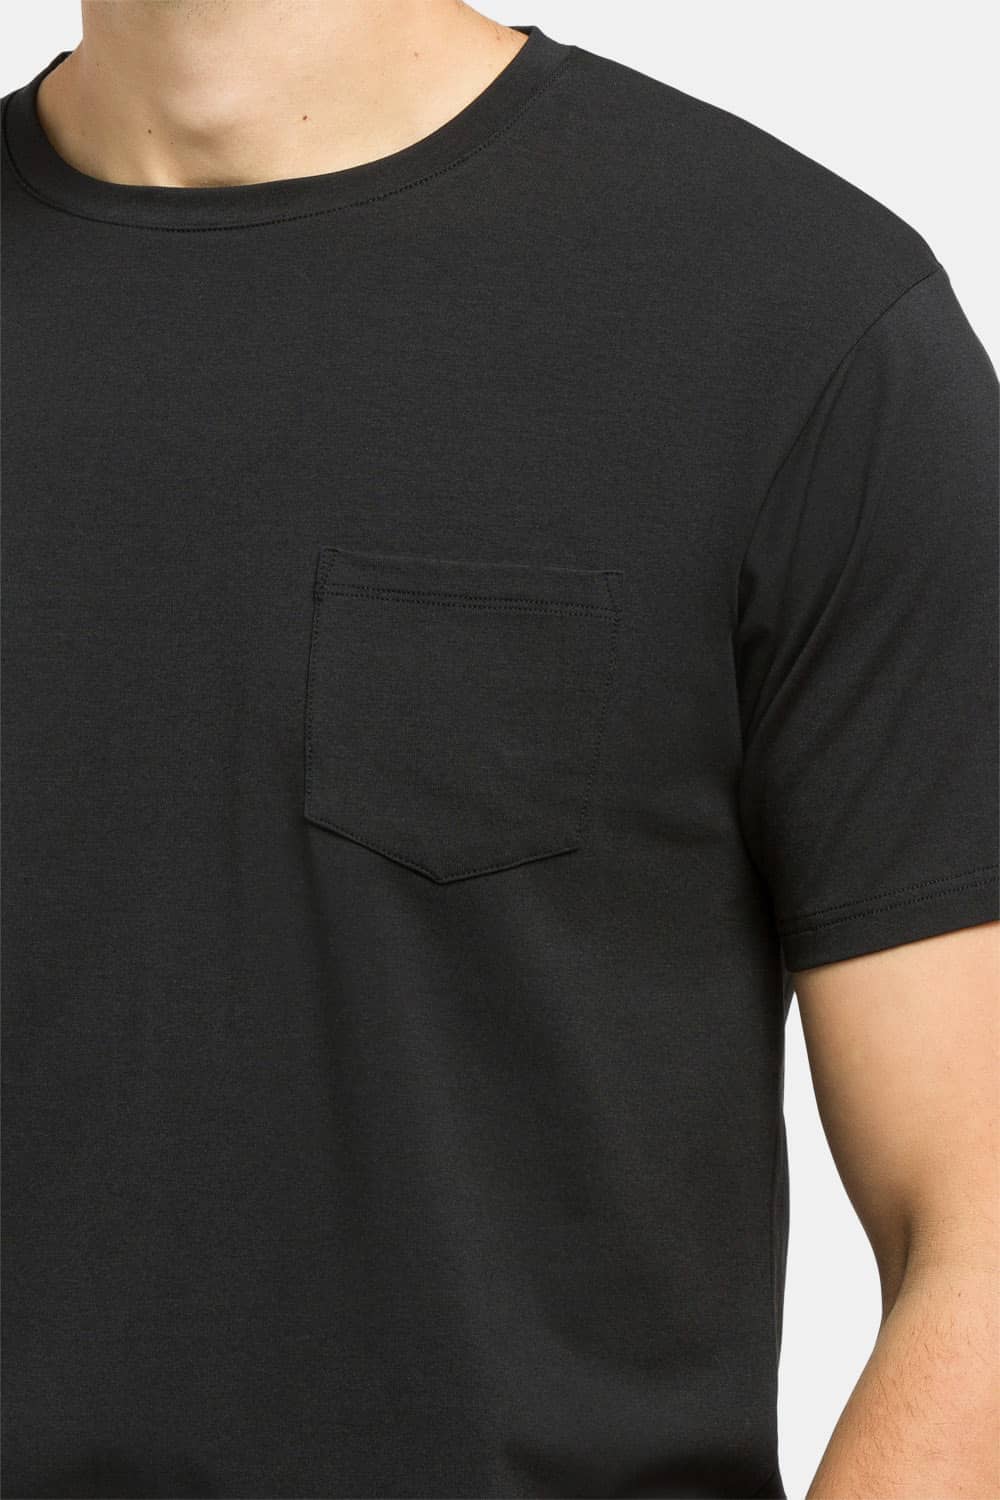 Men's Crew Neck Pocket Tee Mens>Casual>Tops Fishers Finery 